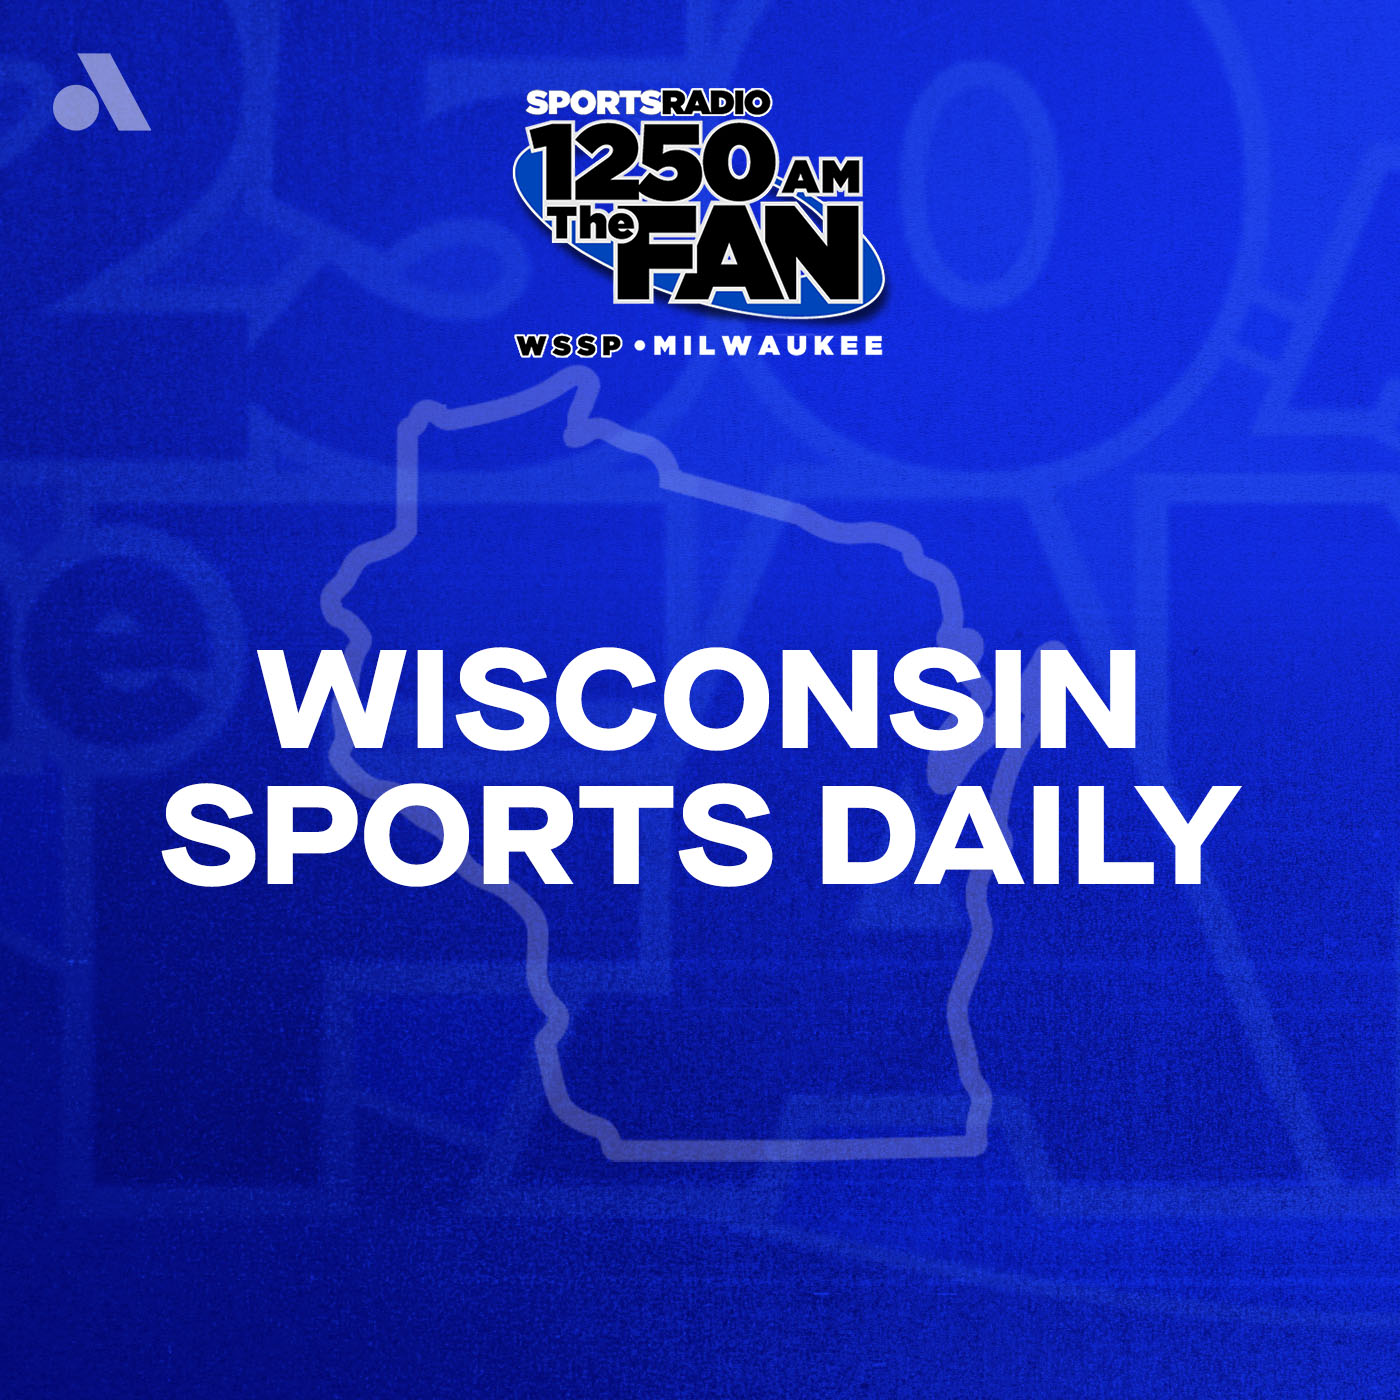 Thursday, May 2nd: Sean Deveney of TheHeavy.com Joins Wisconsin Sports Daily!